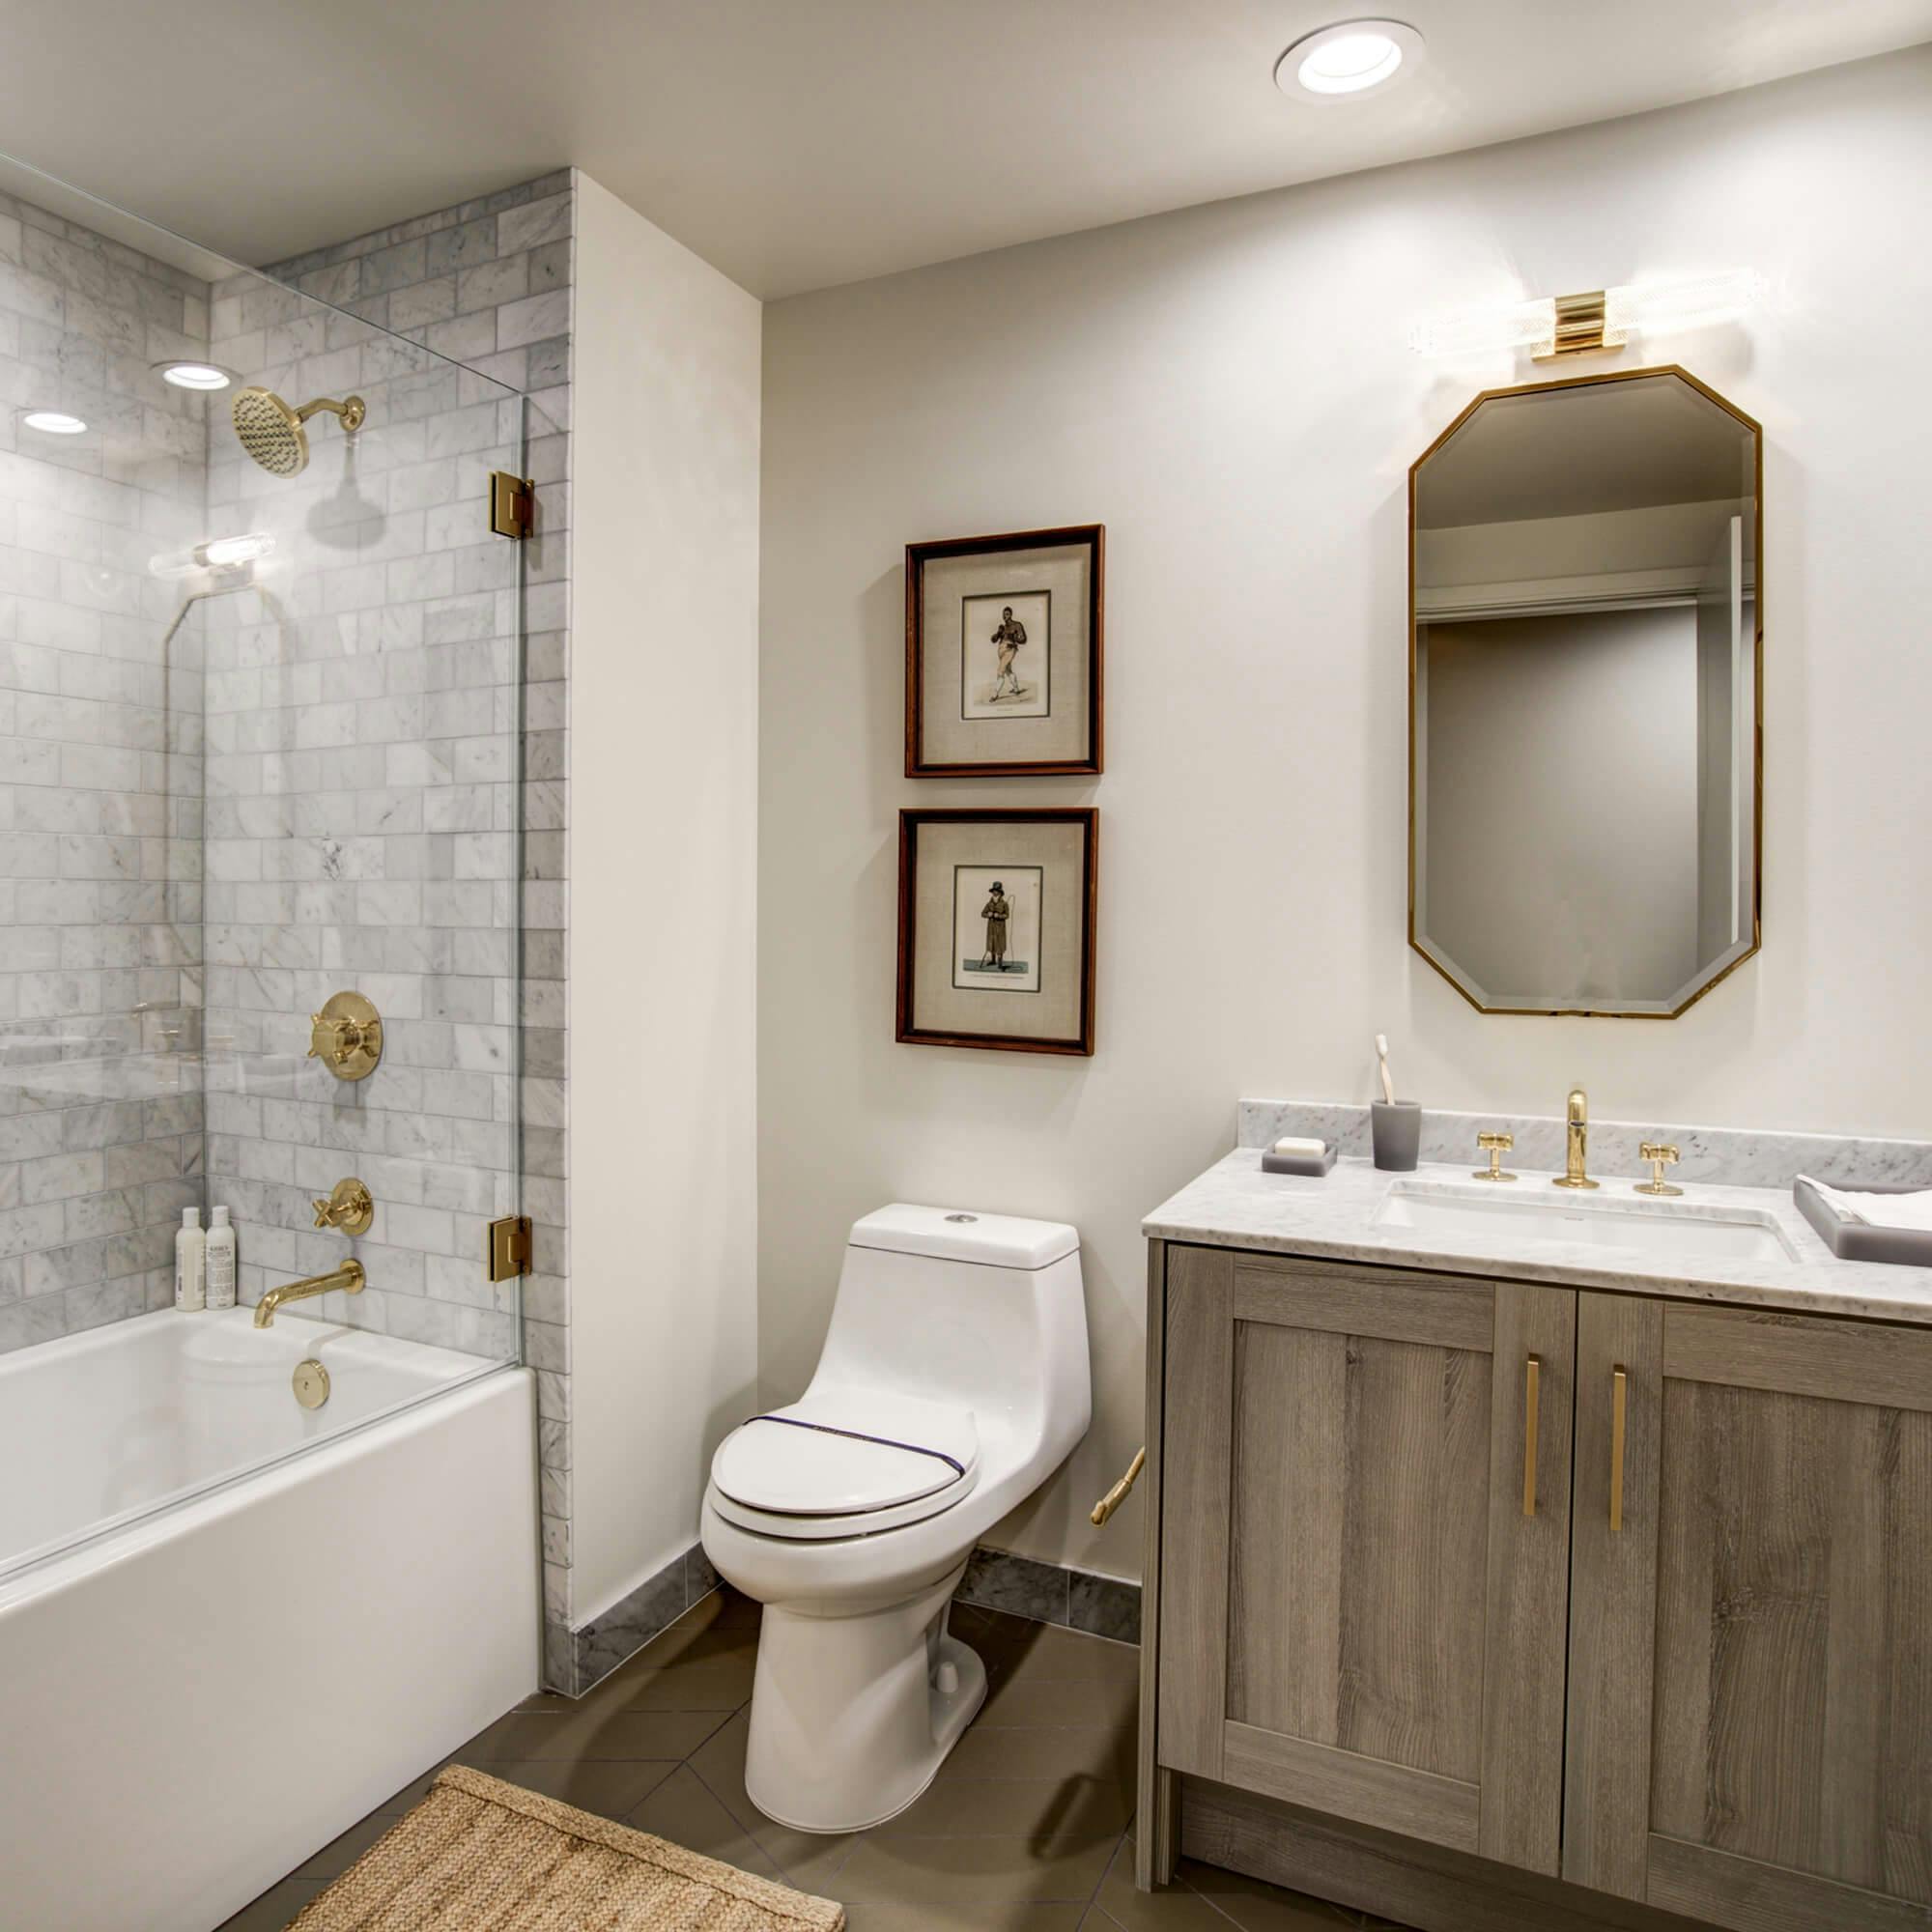 The bathrooms in residences of the Harrison are clean, contemporary, and refreshing, boasting a perfect place for self-care and relaxation.